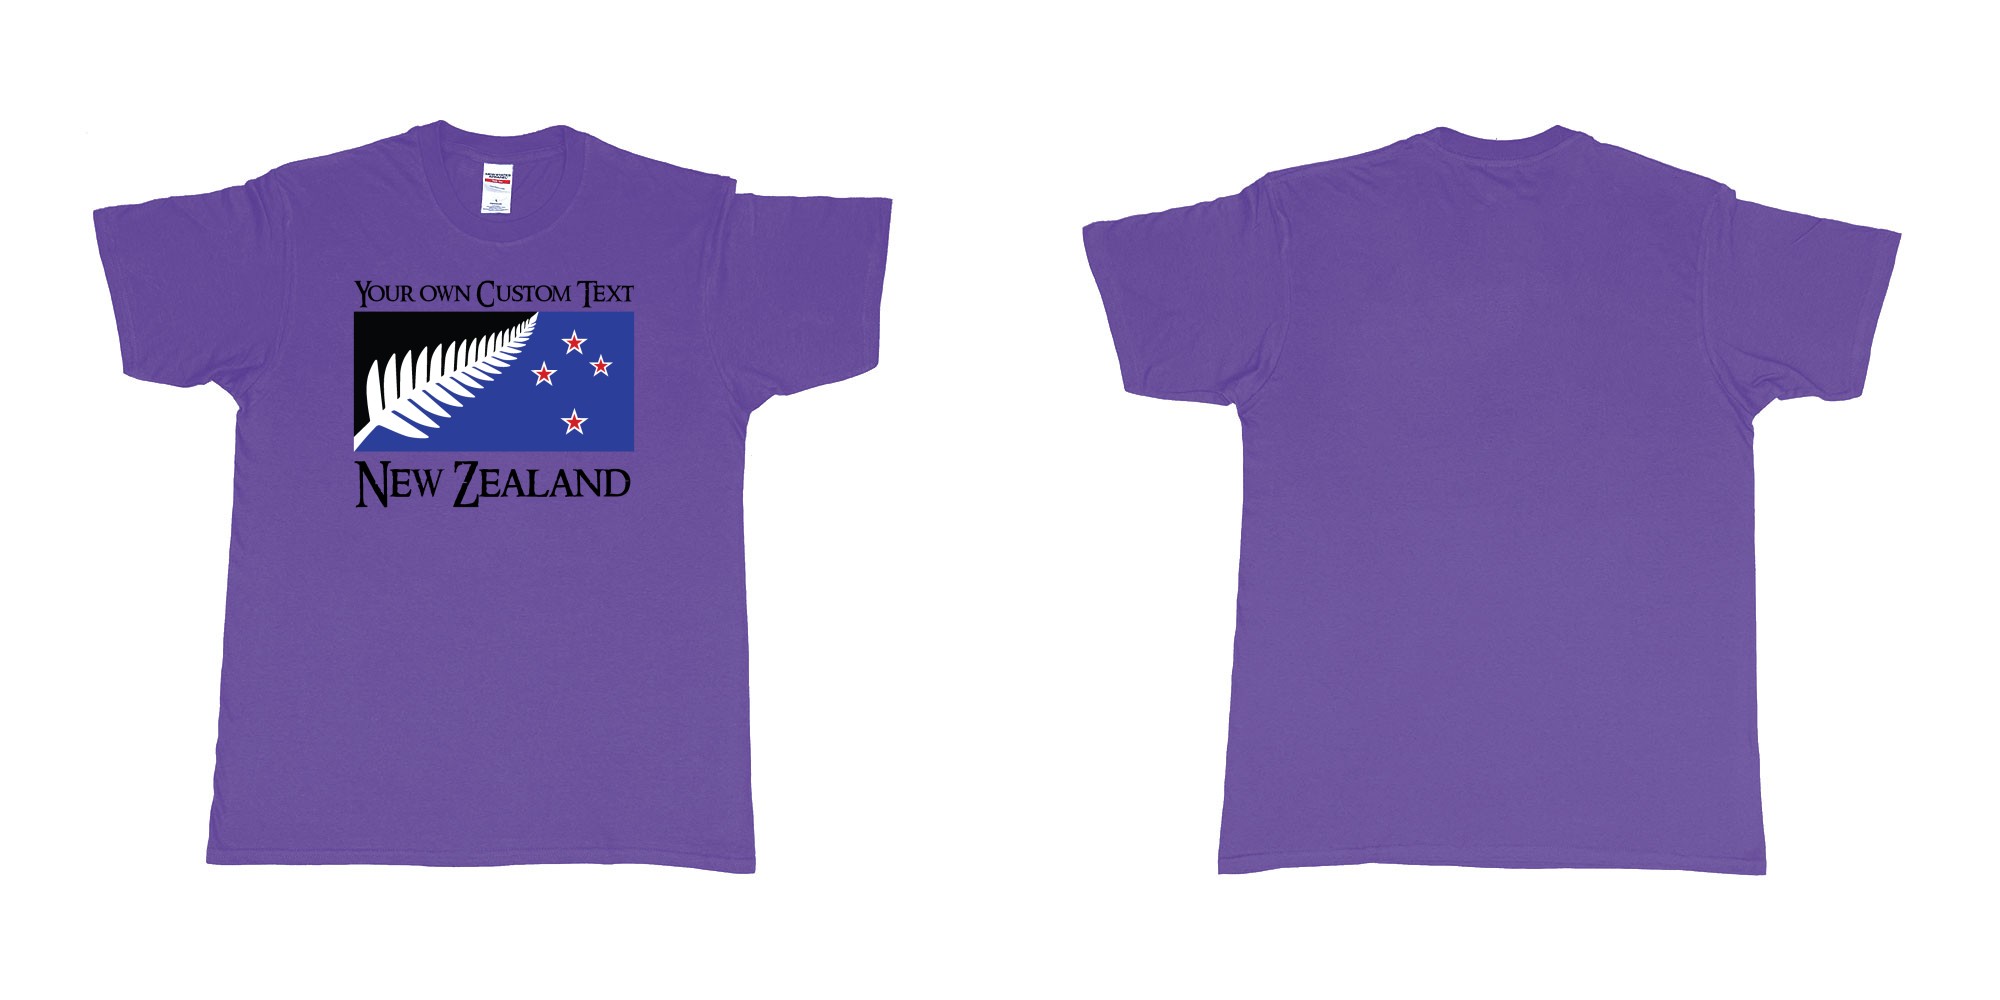 Custom tshirt design new zealand silver fern flag in fabric color purple choice your own text made in Bali by The Pirate Way